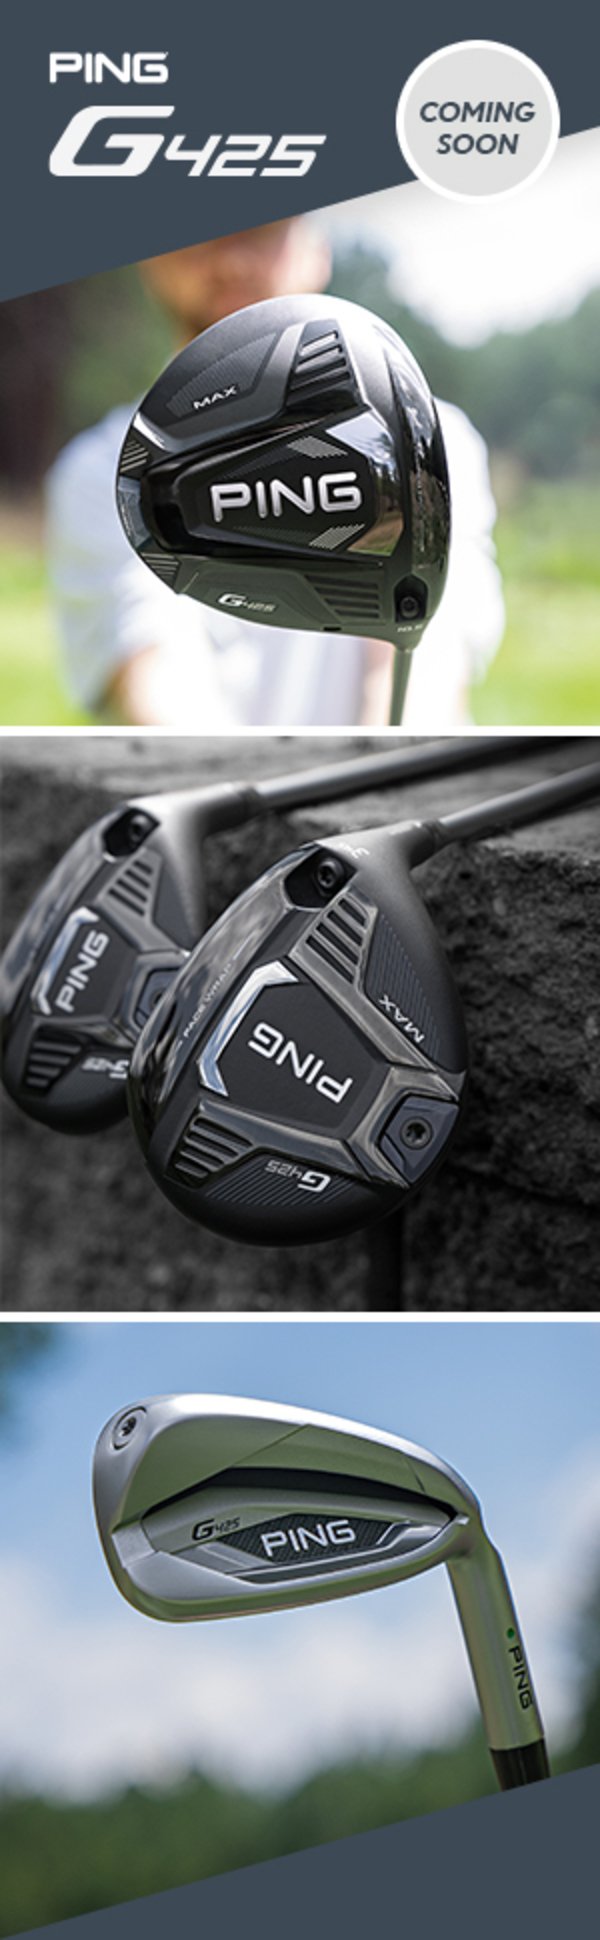 PING G425 woods and irons - register your interest today